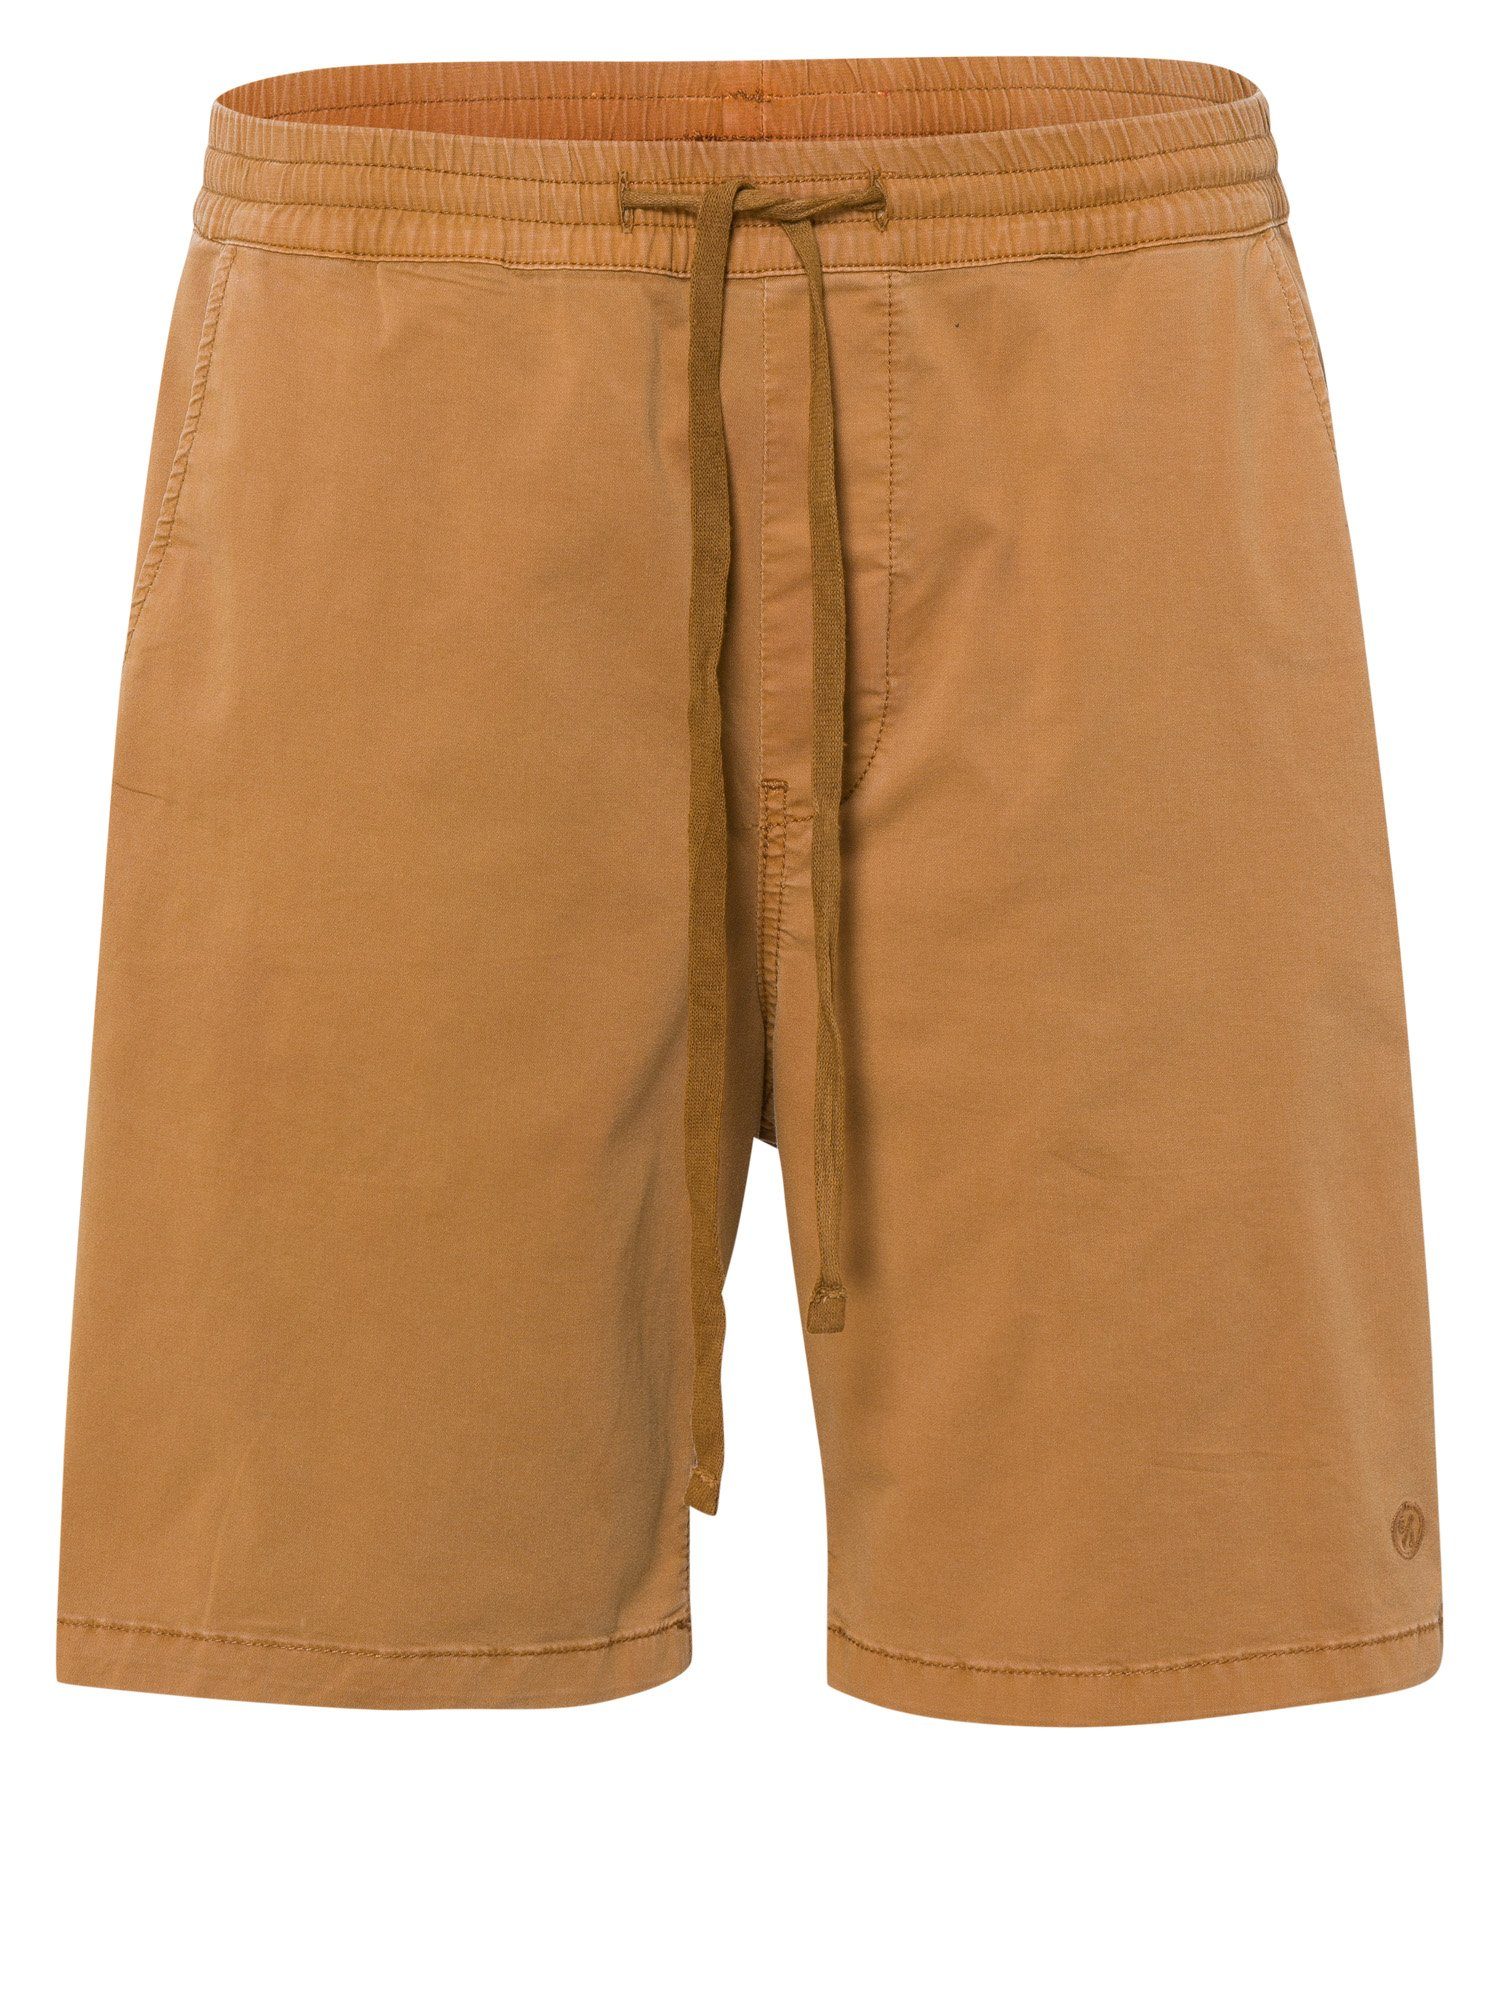 JEANS® CROSS A 700 Relaxshorts